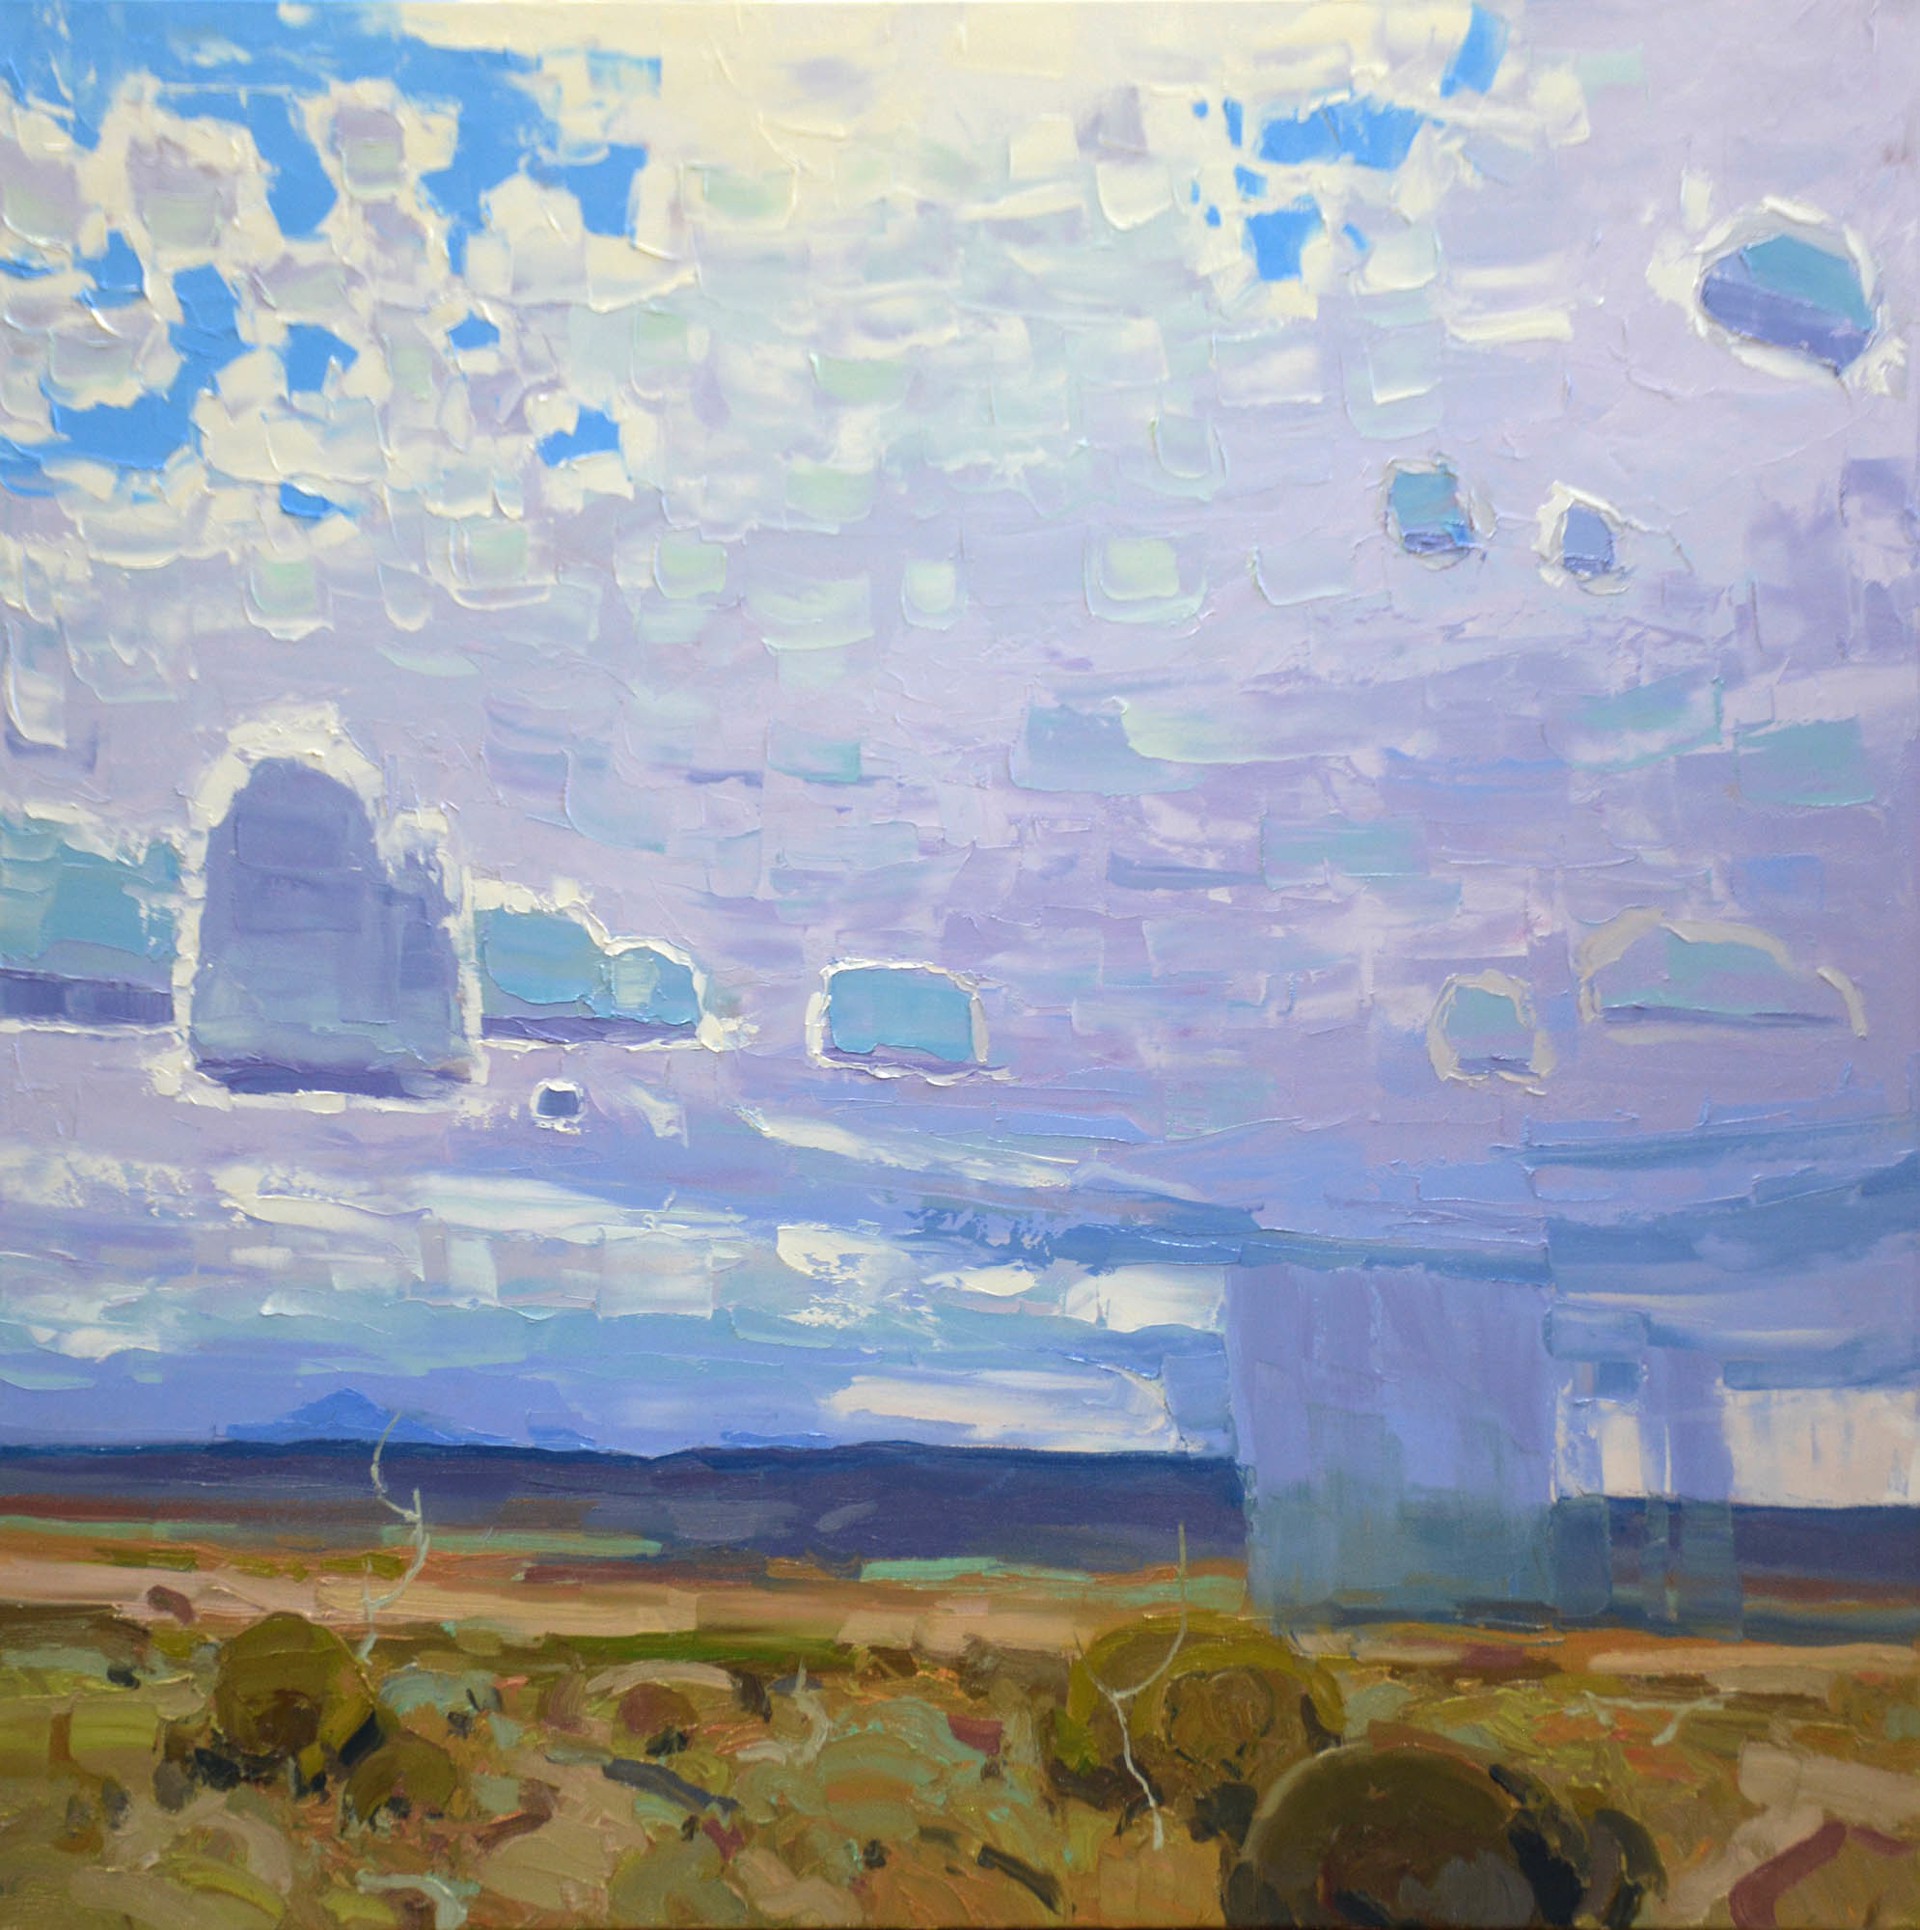 A Contemporary Painting Of A Rainstorm Over The Desert By Silas Thompson Available At Gallery Wild